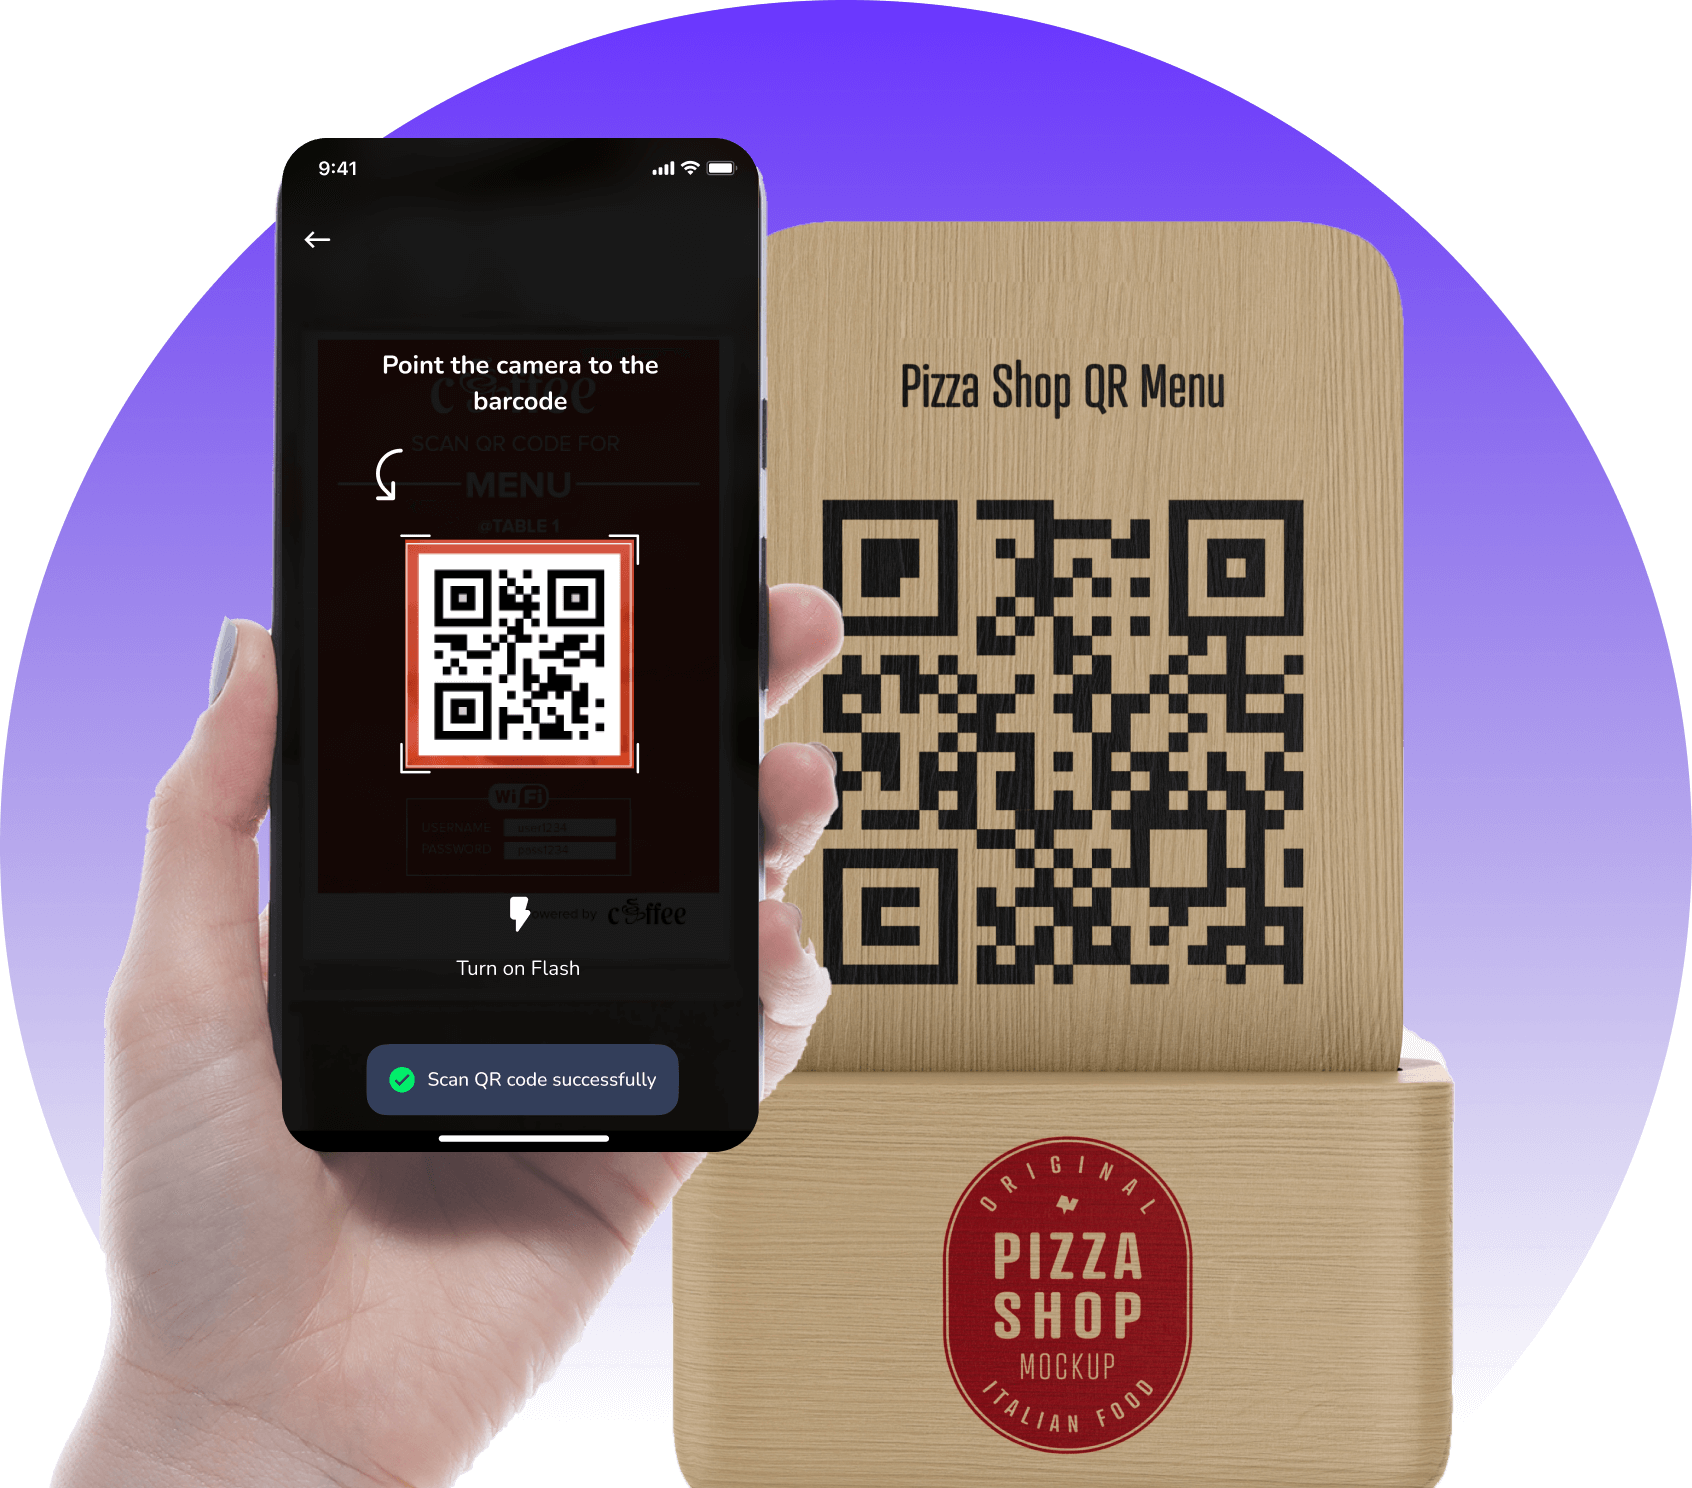 Why do you need to create QR code for ordering at your restaurant/diner?